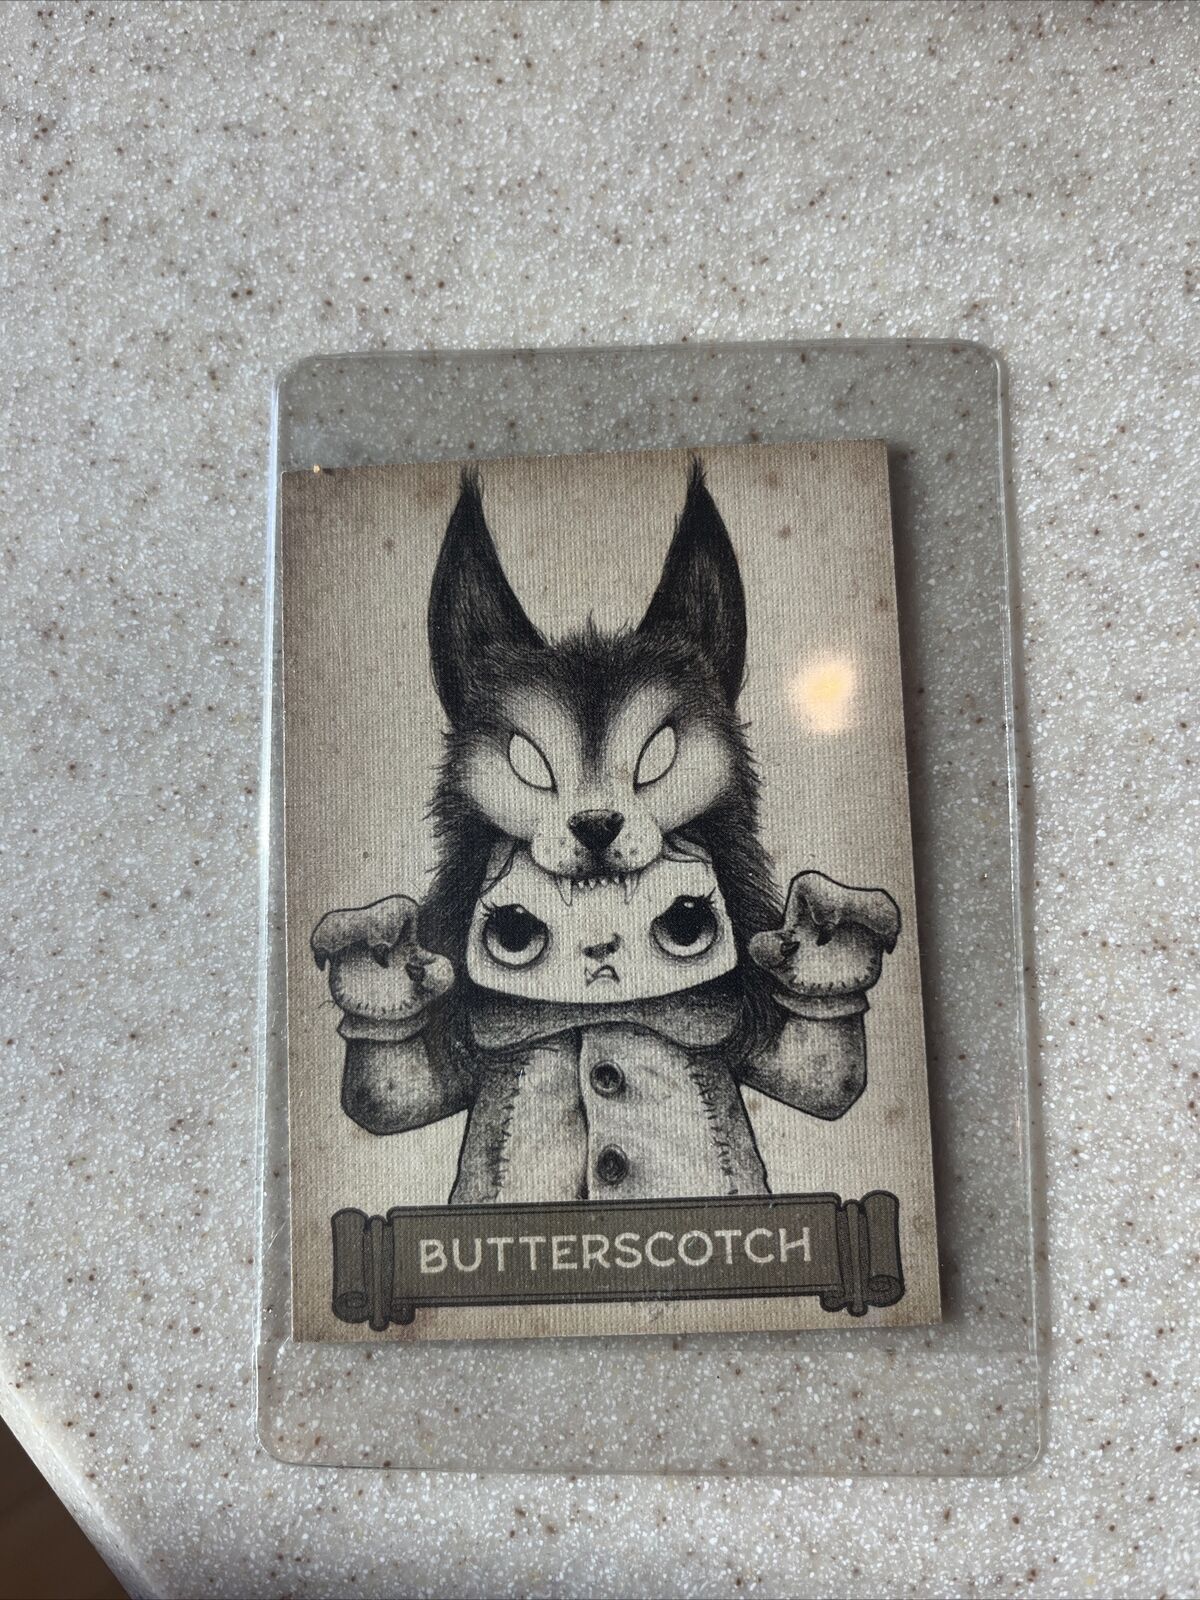 Gideons Bakehouse Butterscotch #31 Rare R3 Chase Trading Card